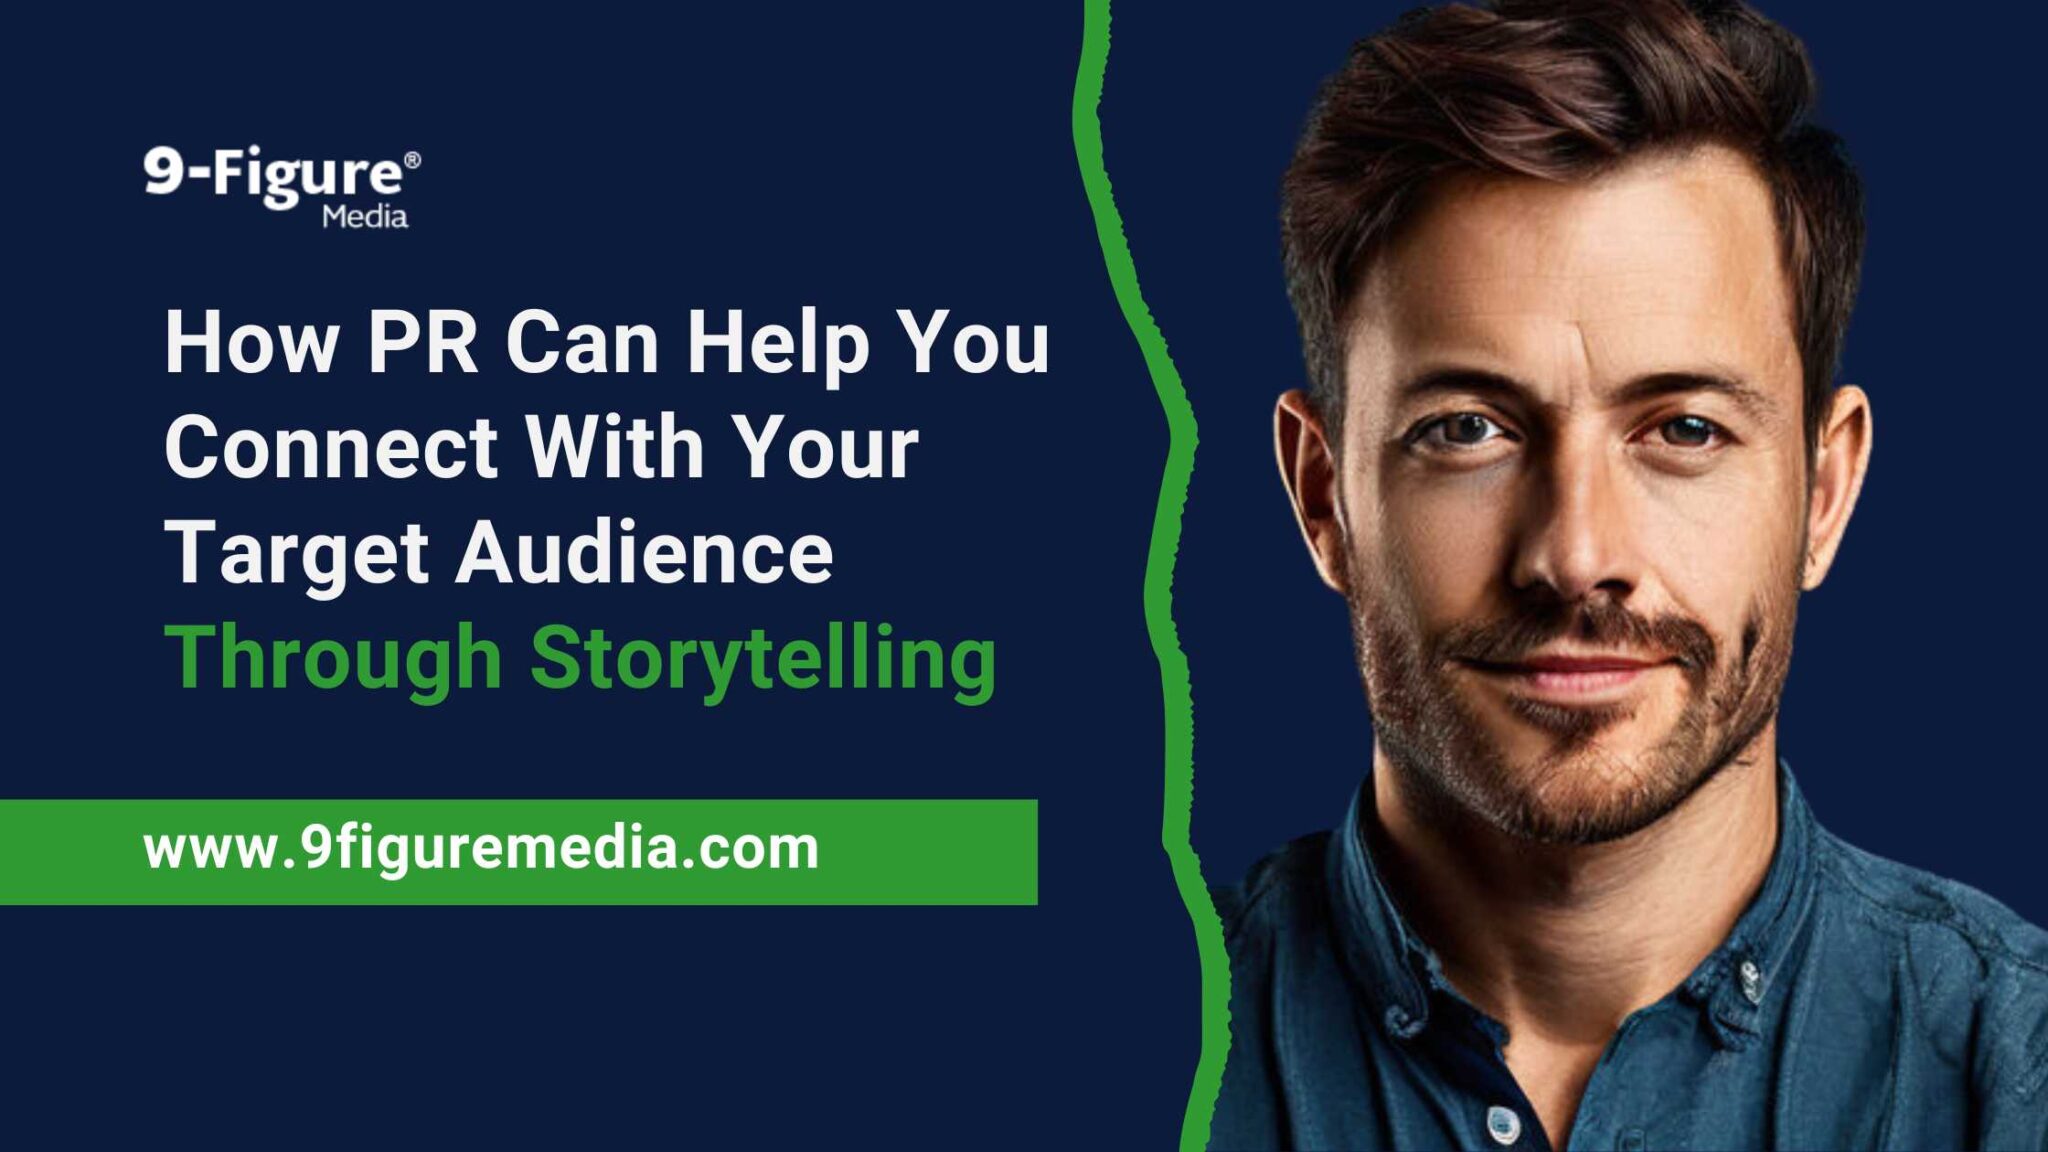 How PR Can Help You Connect With Your Target Audience Through Storytelling